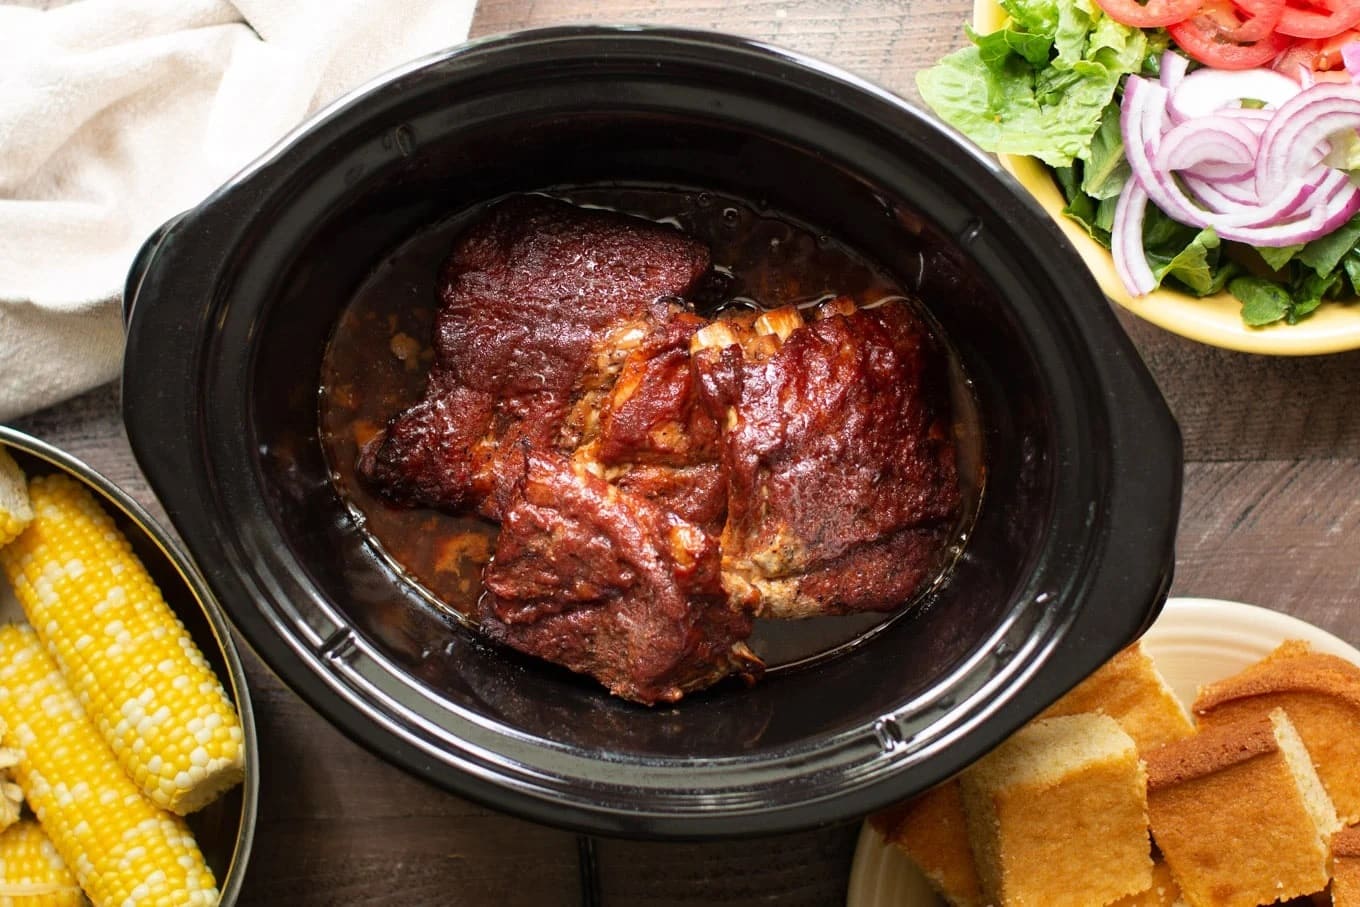 How To Cook Ribs In The Slow Cooker